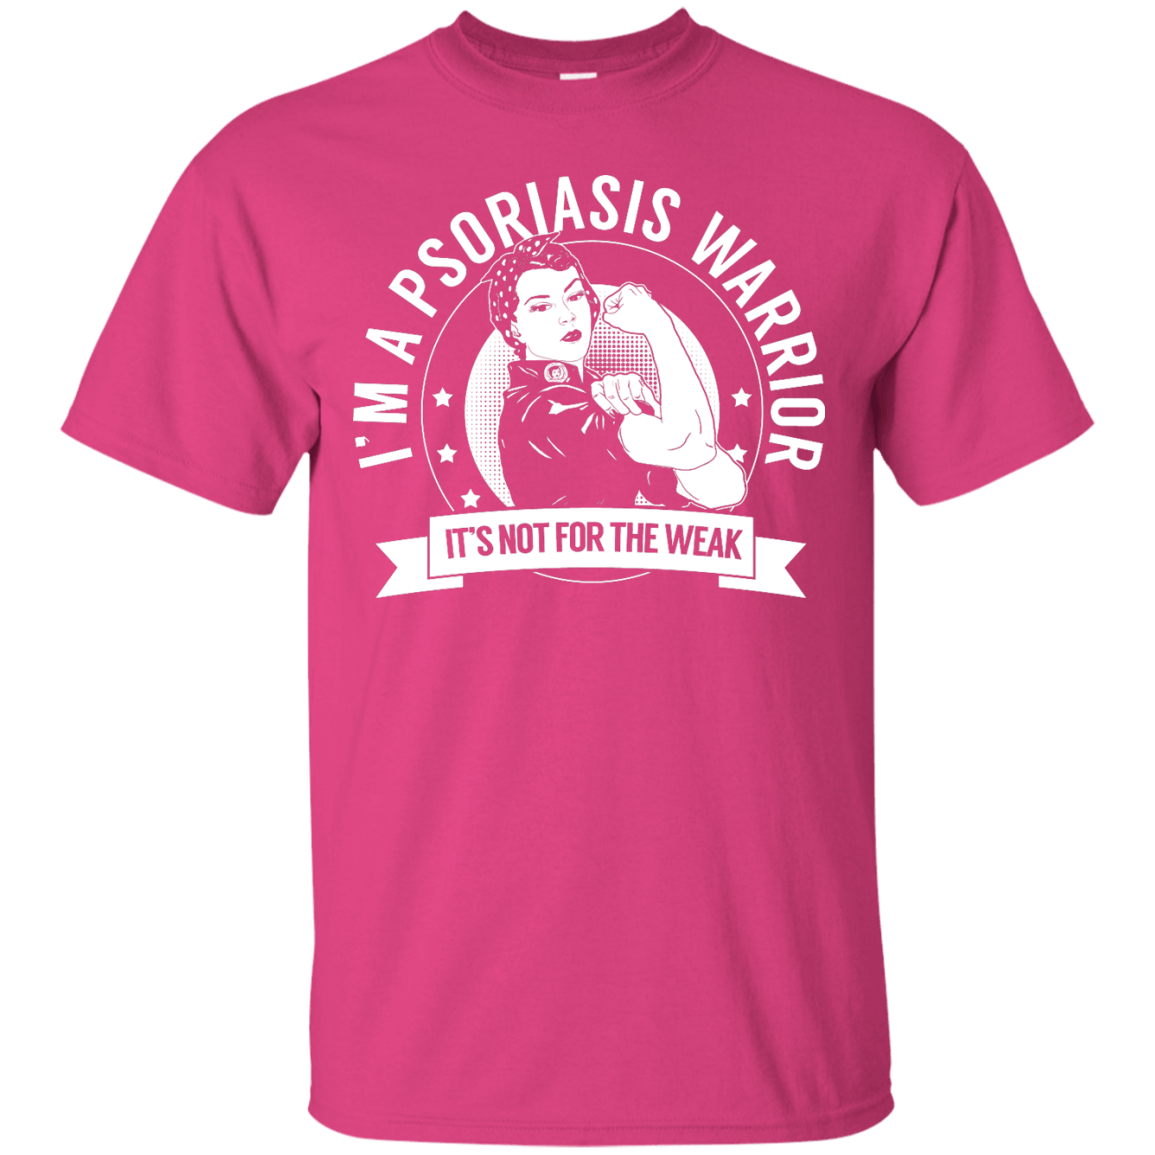 Psoriasis Warrior Not For The Weak Unisex Shirt - The Unchargeables